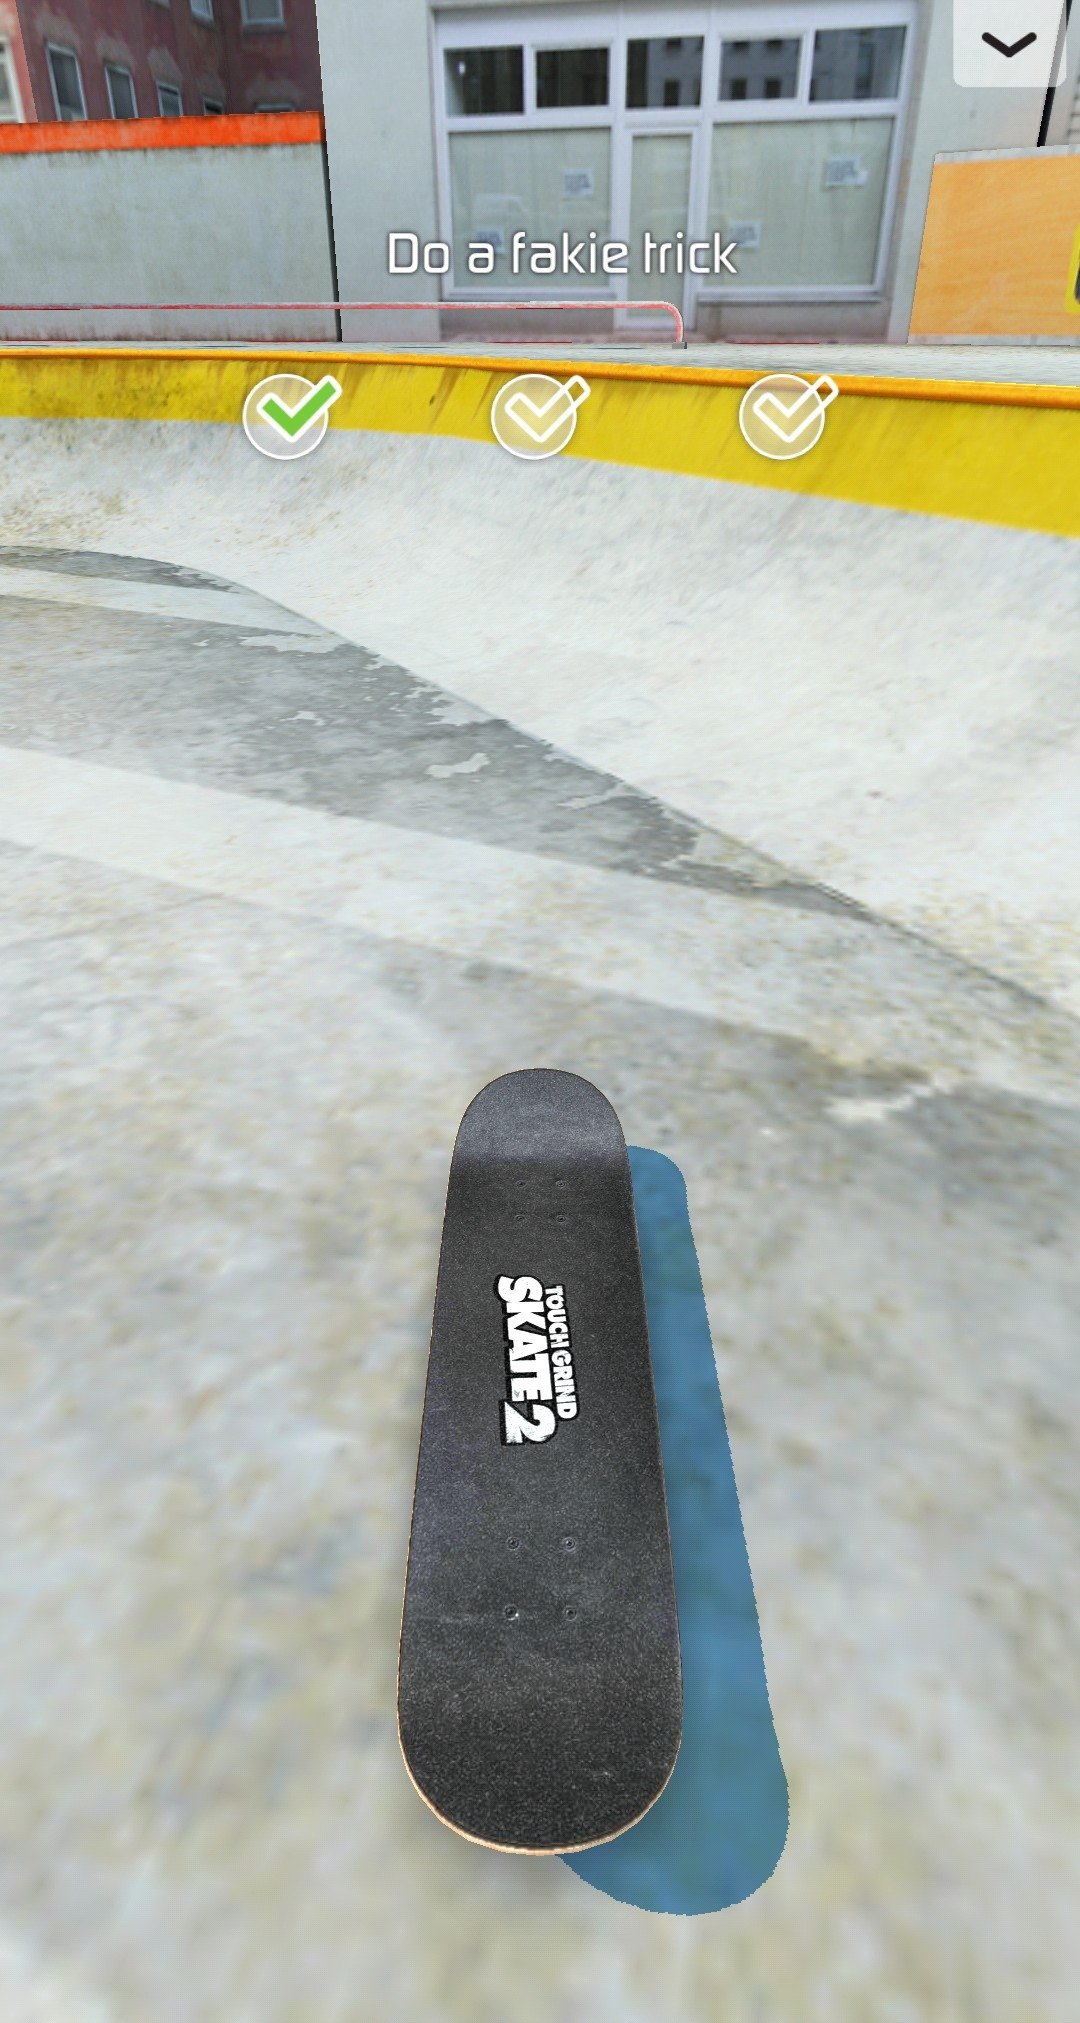 Touchgrind Skate 2 2.0.5 Free Download